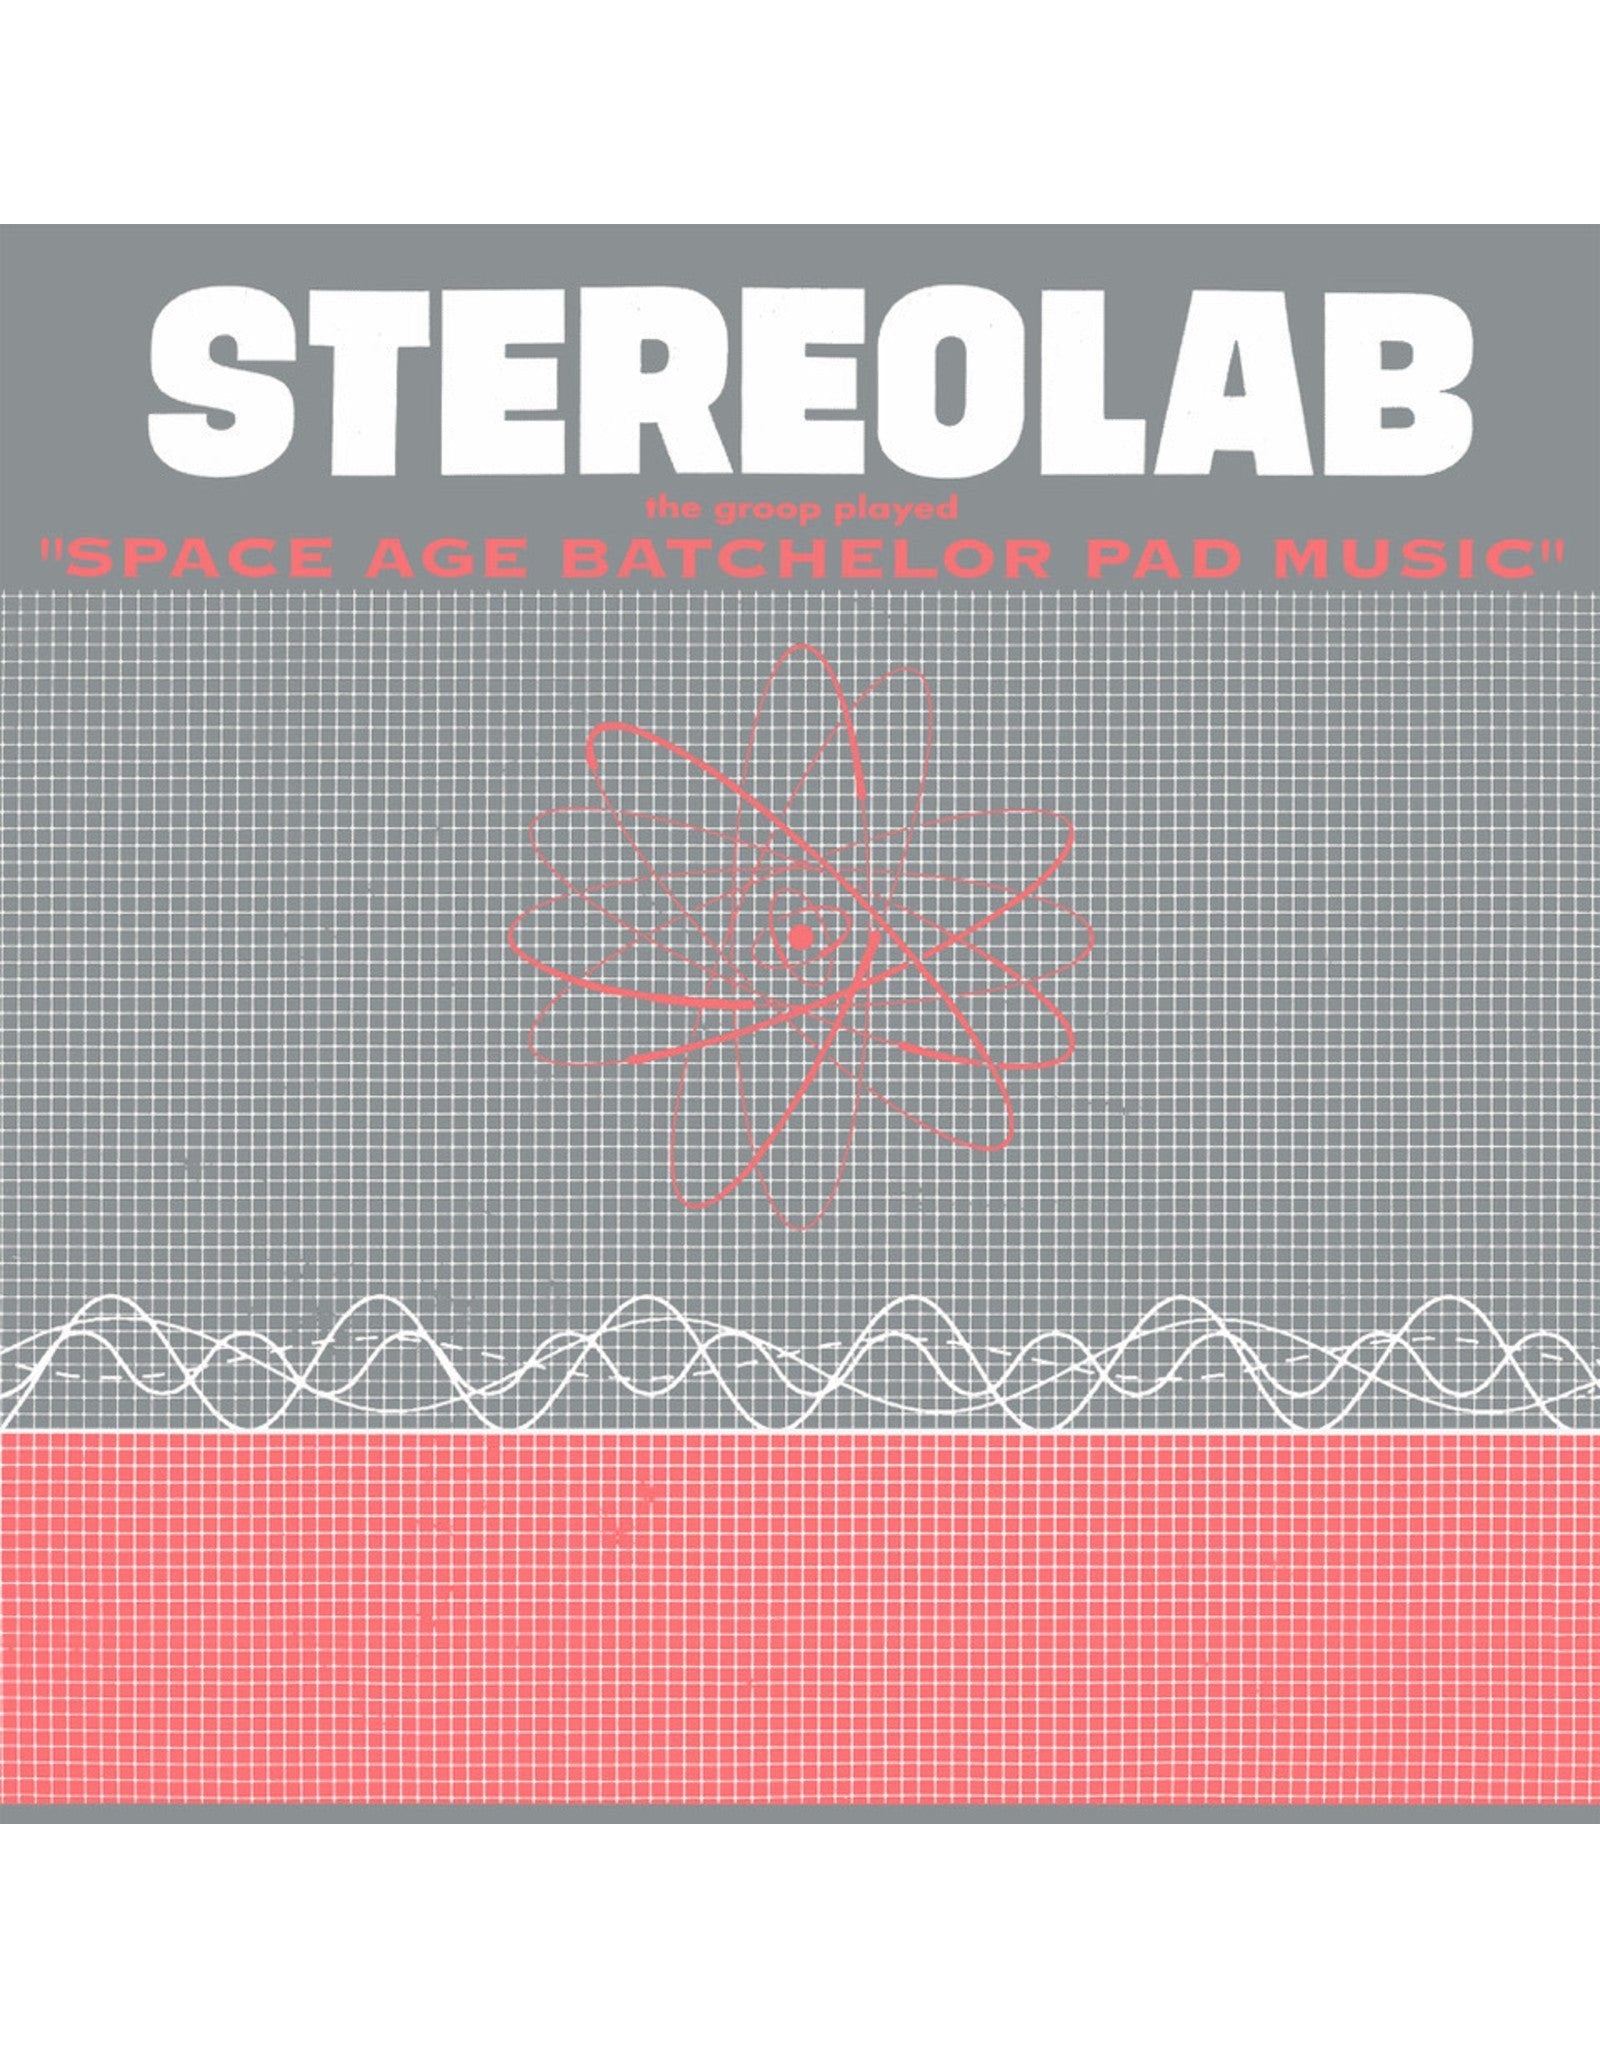 Stereolab - The groop played “Space Age Batchelor Pad Music” - 33RPM